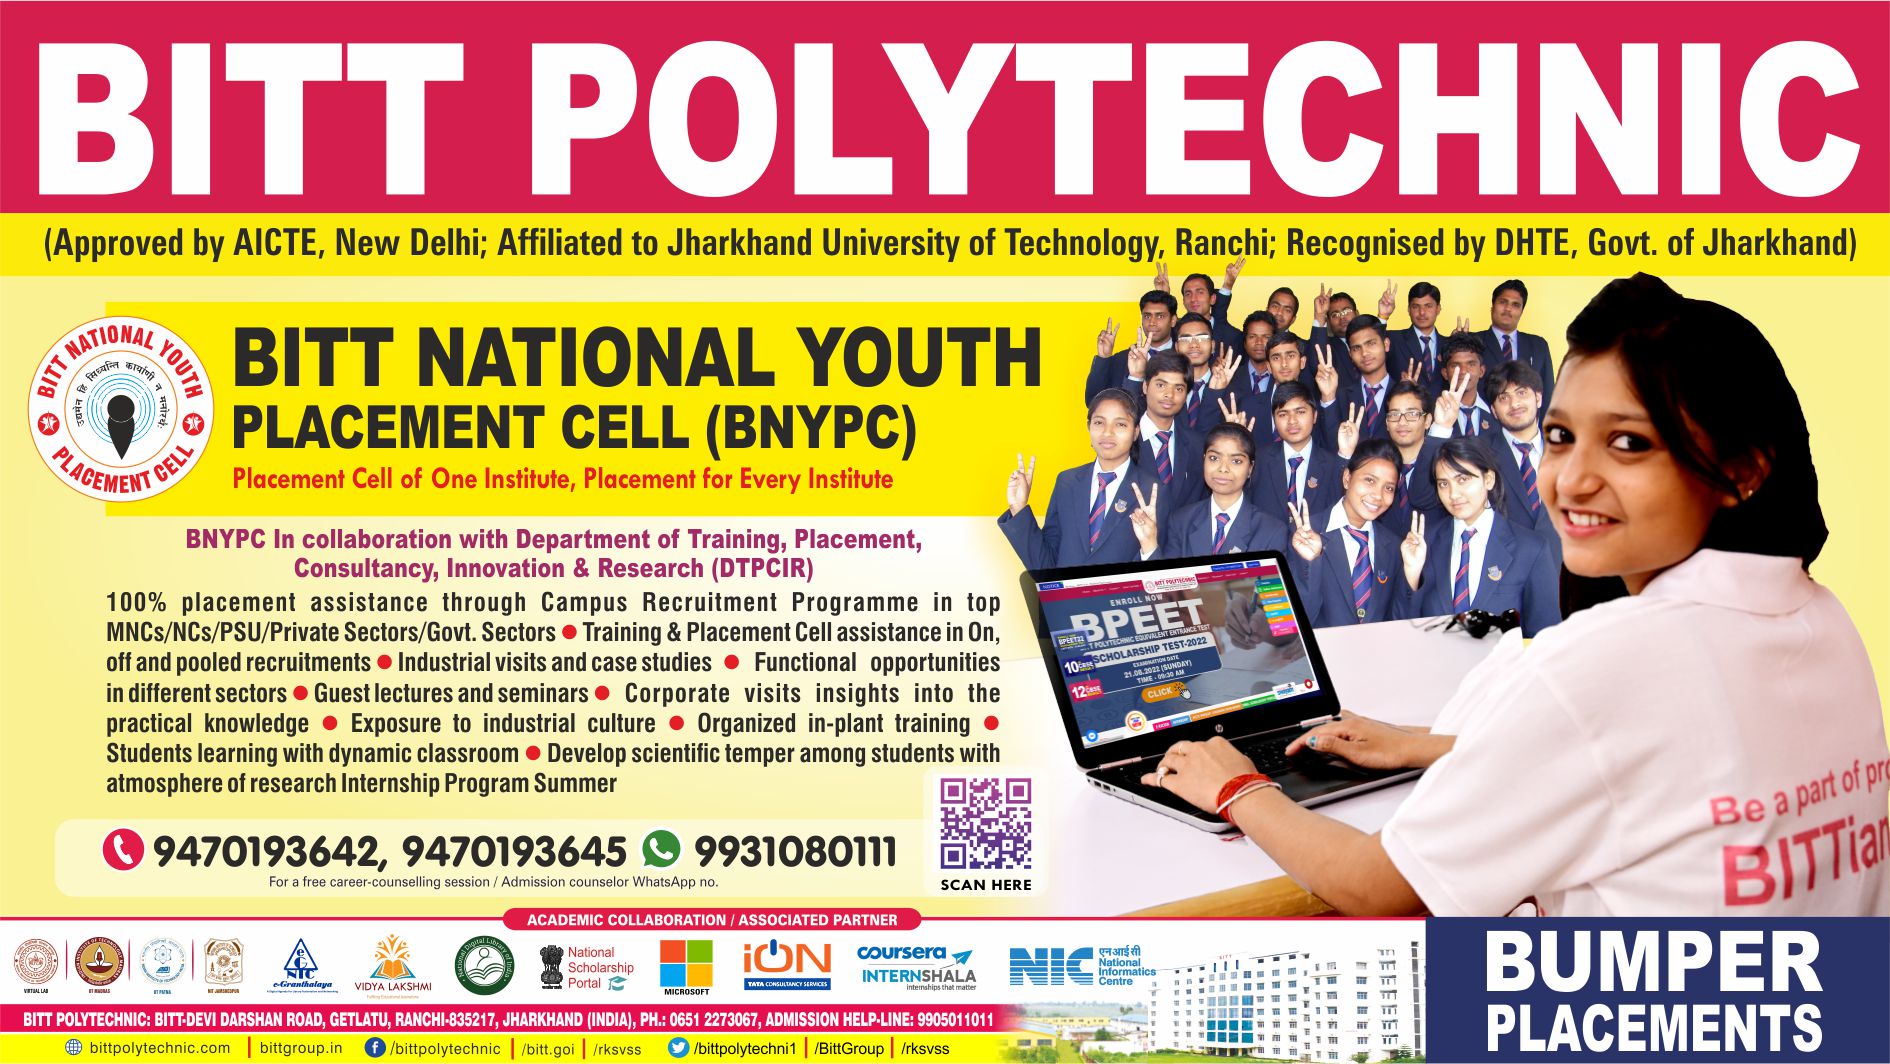 BITT National Youth Placement Cell